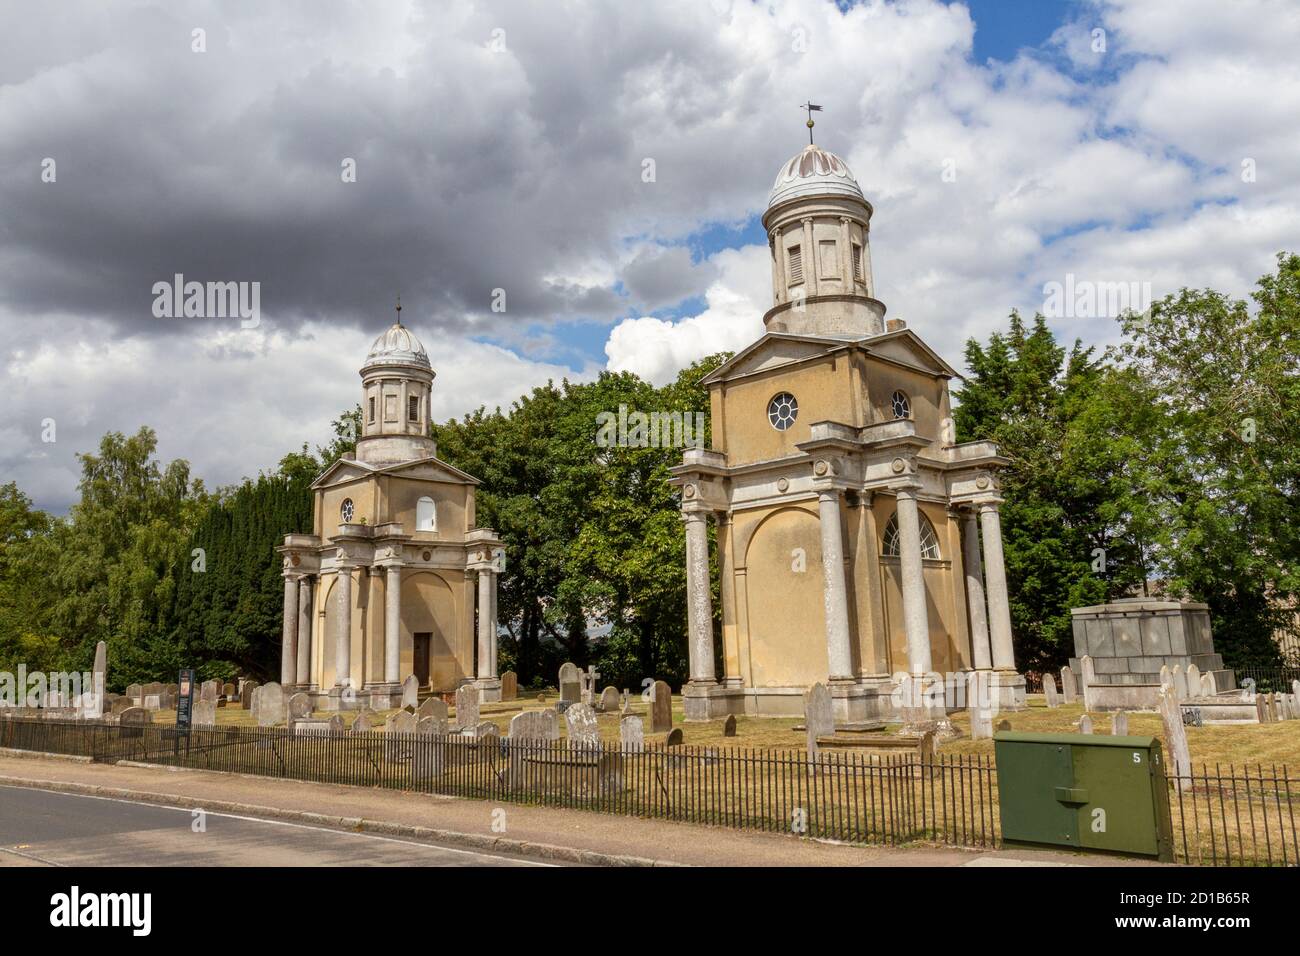 Mistley Towers, the twin towers of the now demolished Church of St. Mary the Virgin at Mistley in Essex, UK. Stock Photo